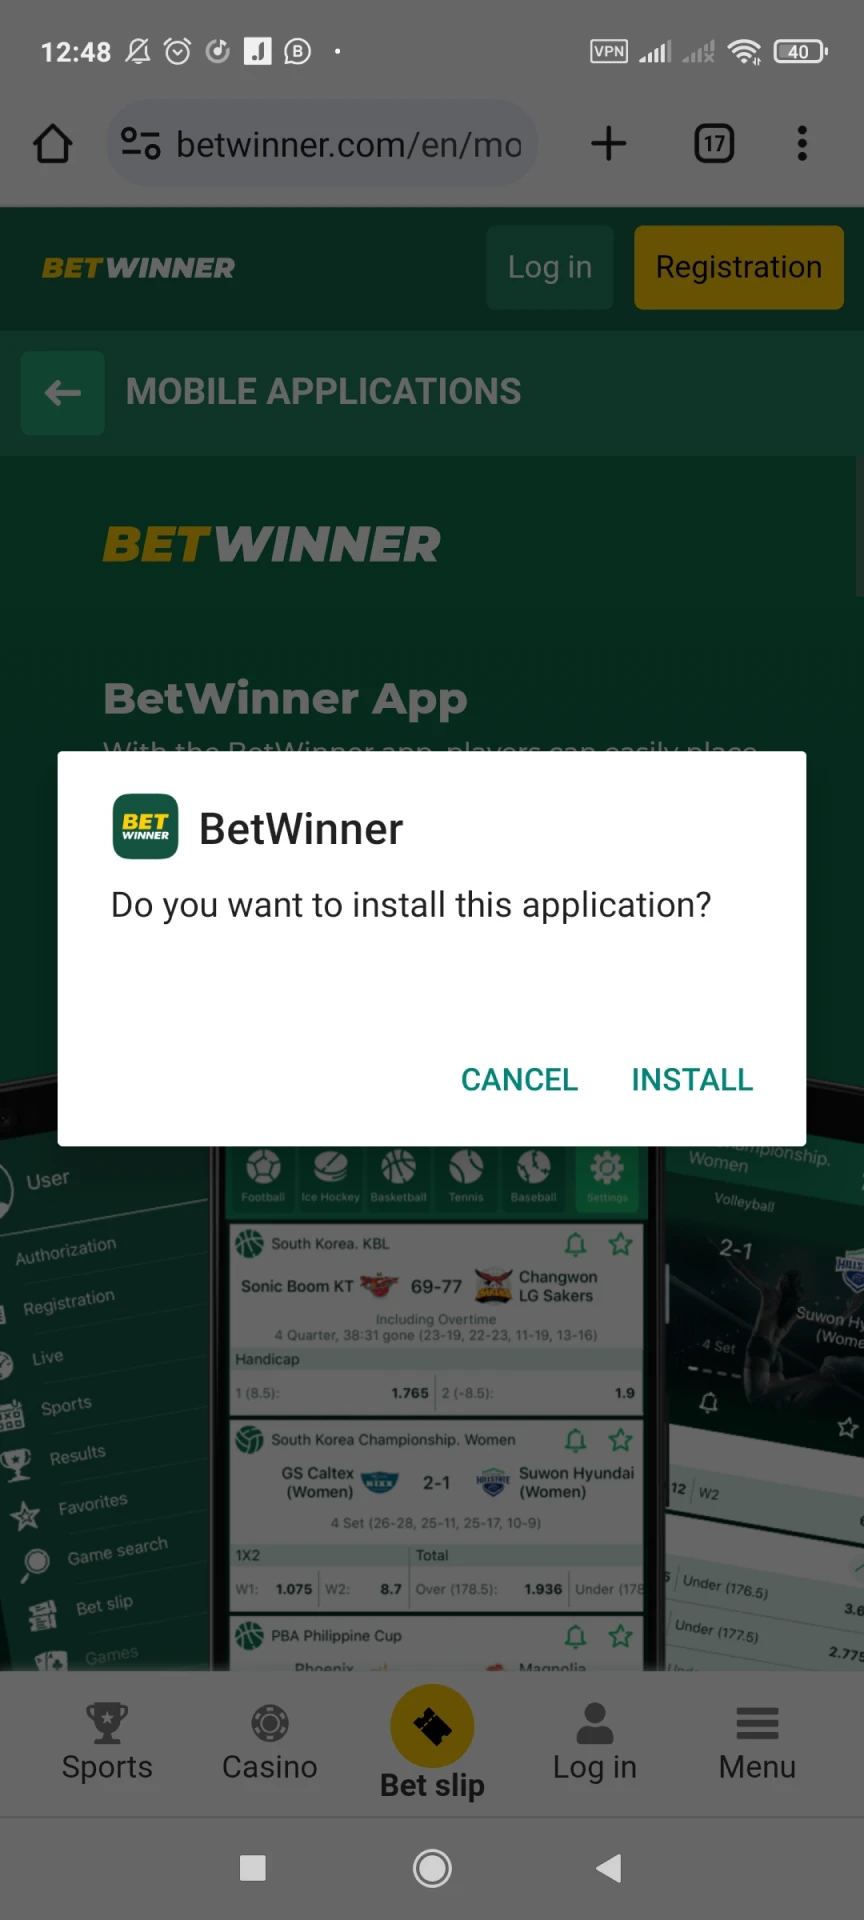 Start installing the Betwinner app for Android.